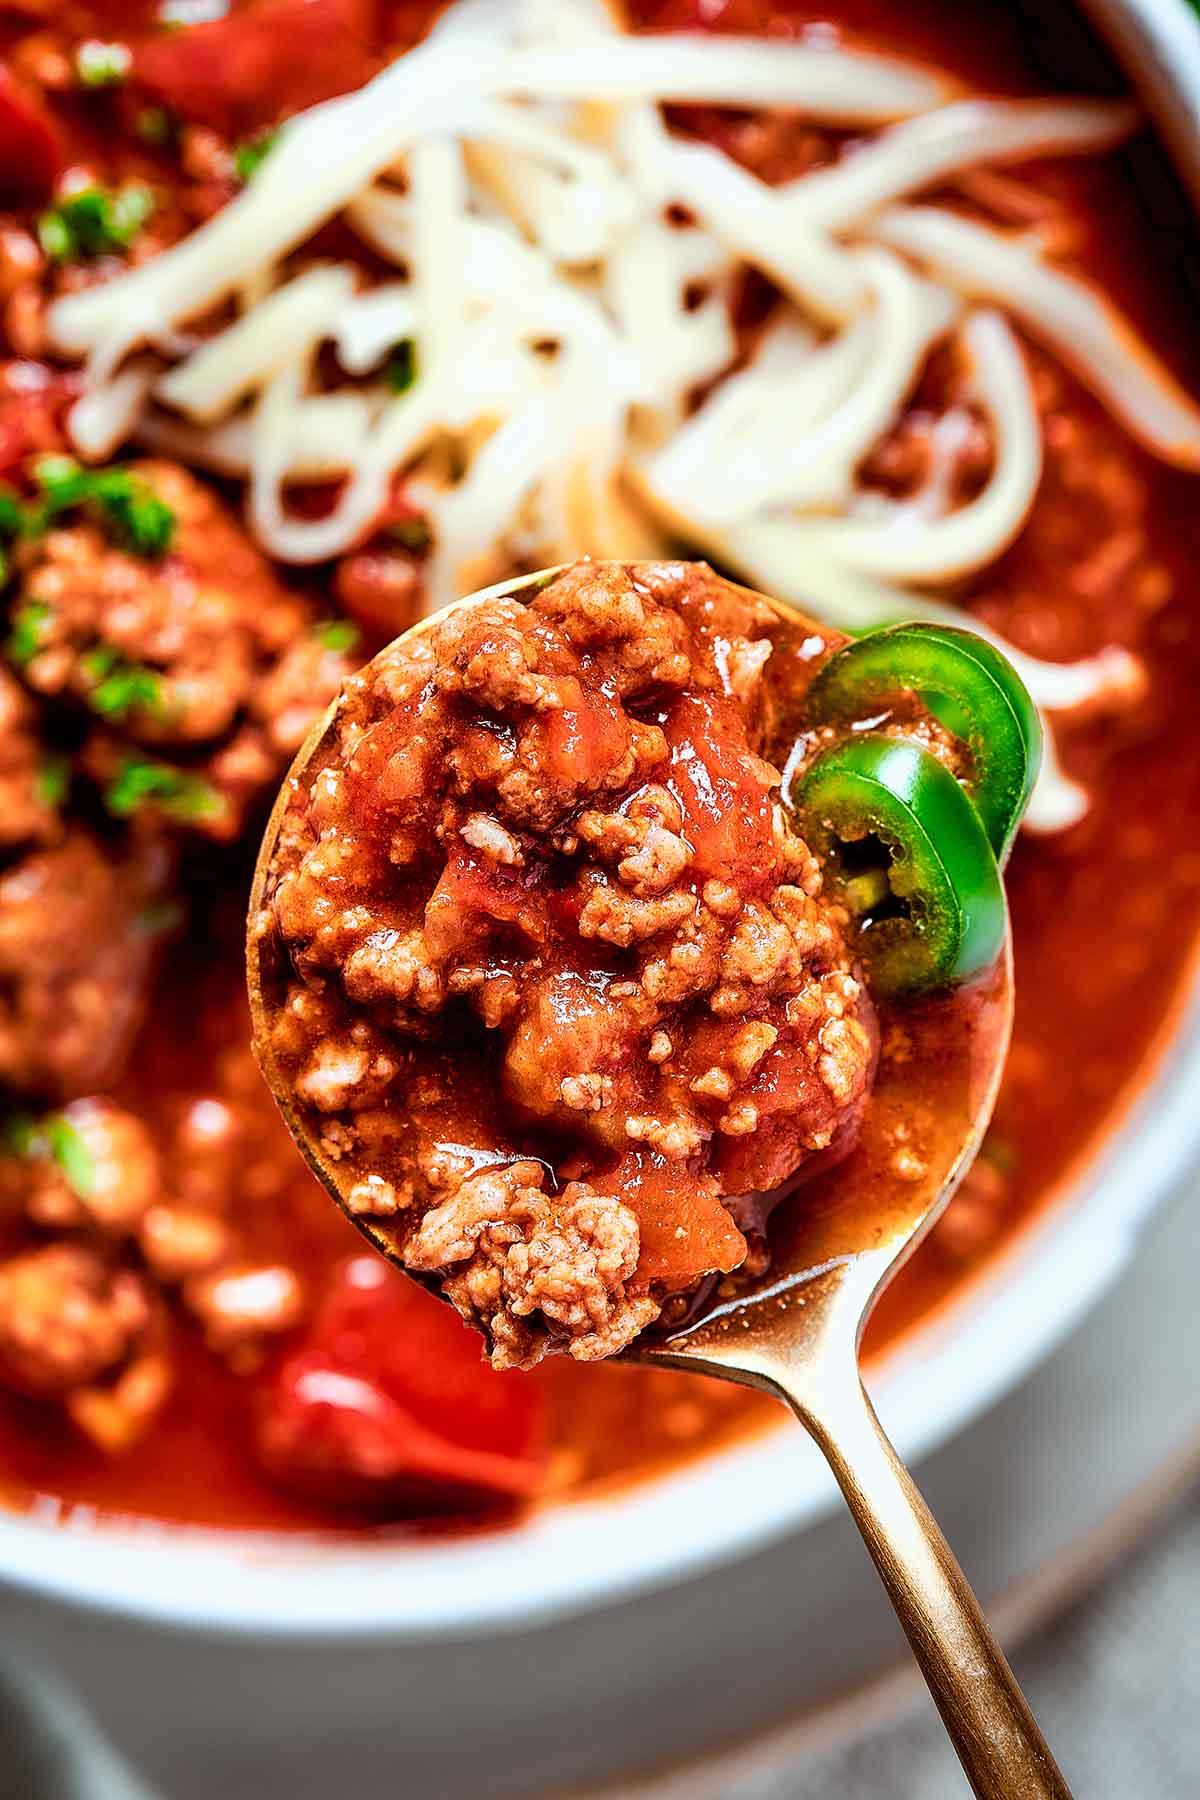 beanless chili recipe with jalapeno peppers.